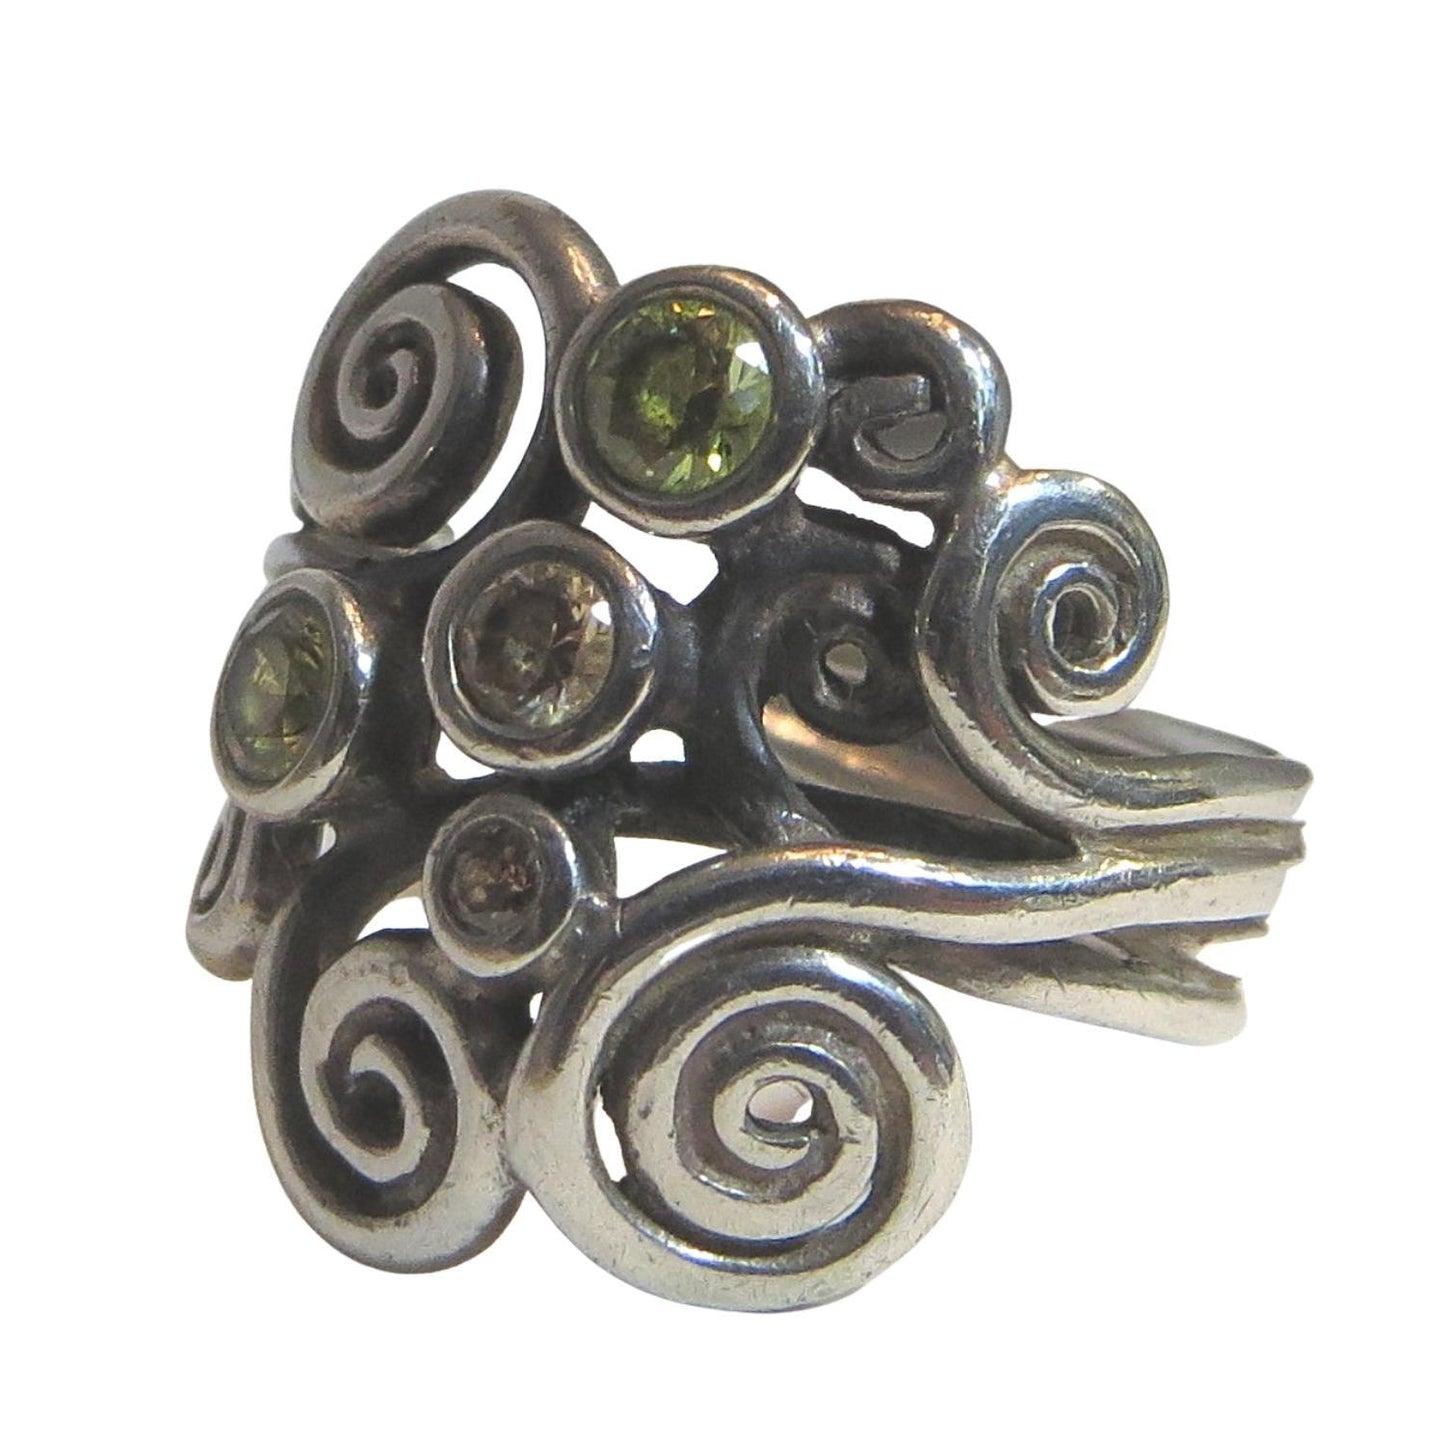 Pandora 190203CZP AUTUMN WIND Sterling Silver and CZ Ring.  Clear and green faceted CZs sit atop swirls of sterling.